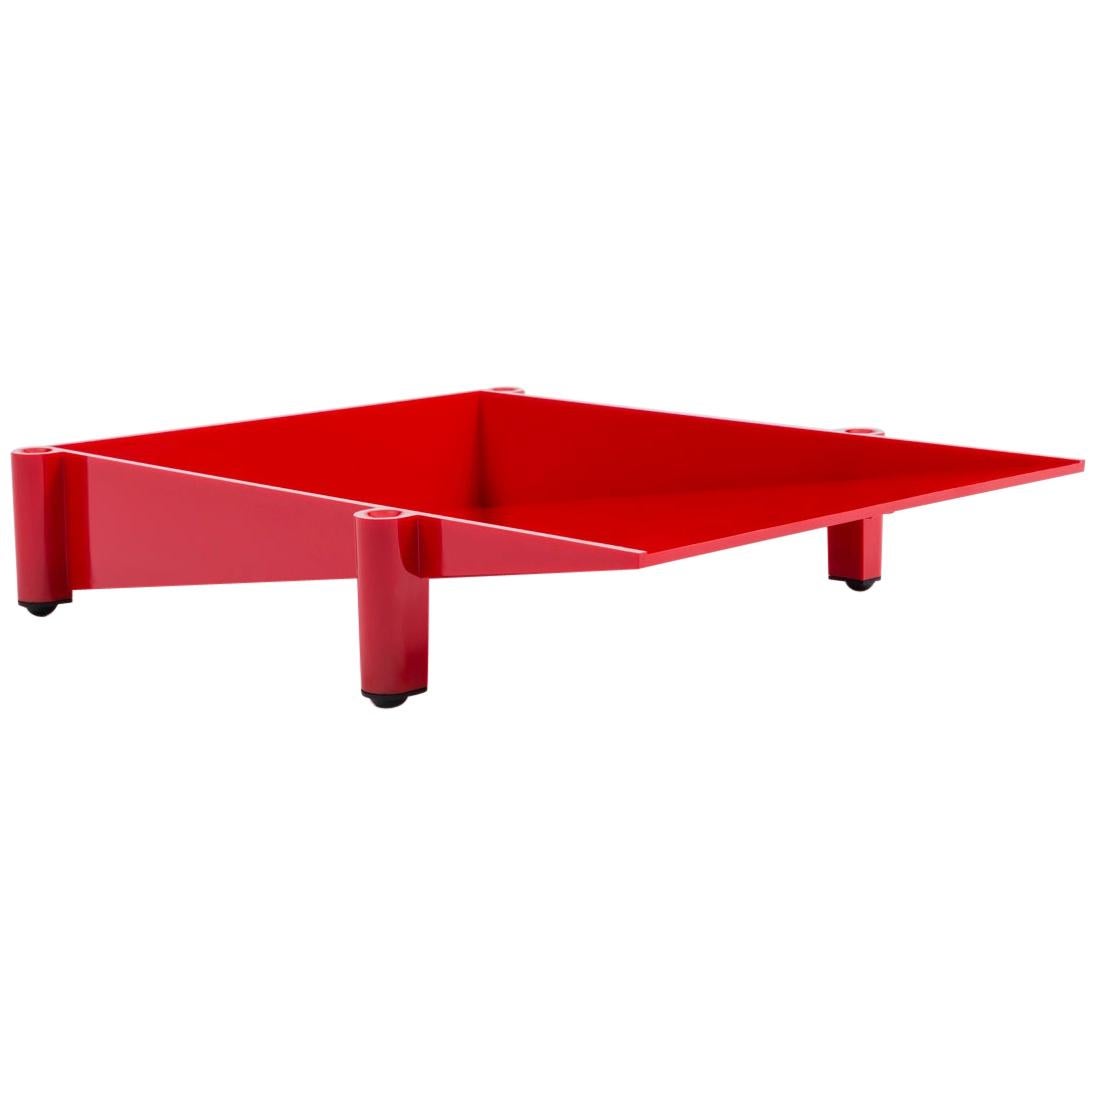 Danese Milano Sumatra Red Paper Tray in Technopolymer by Enzo Mari For Sale